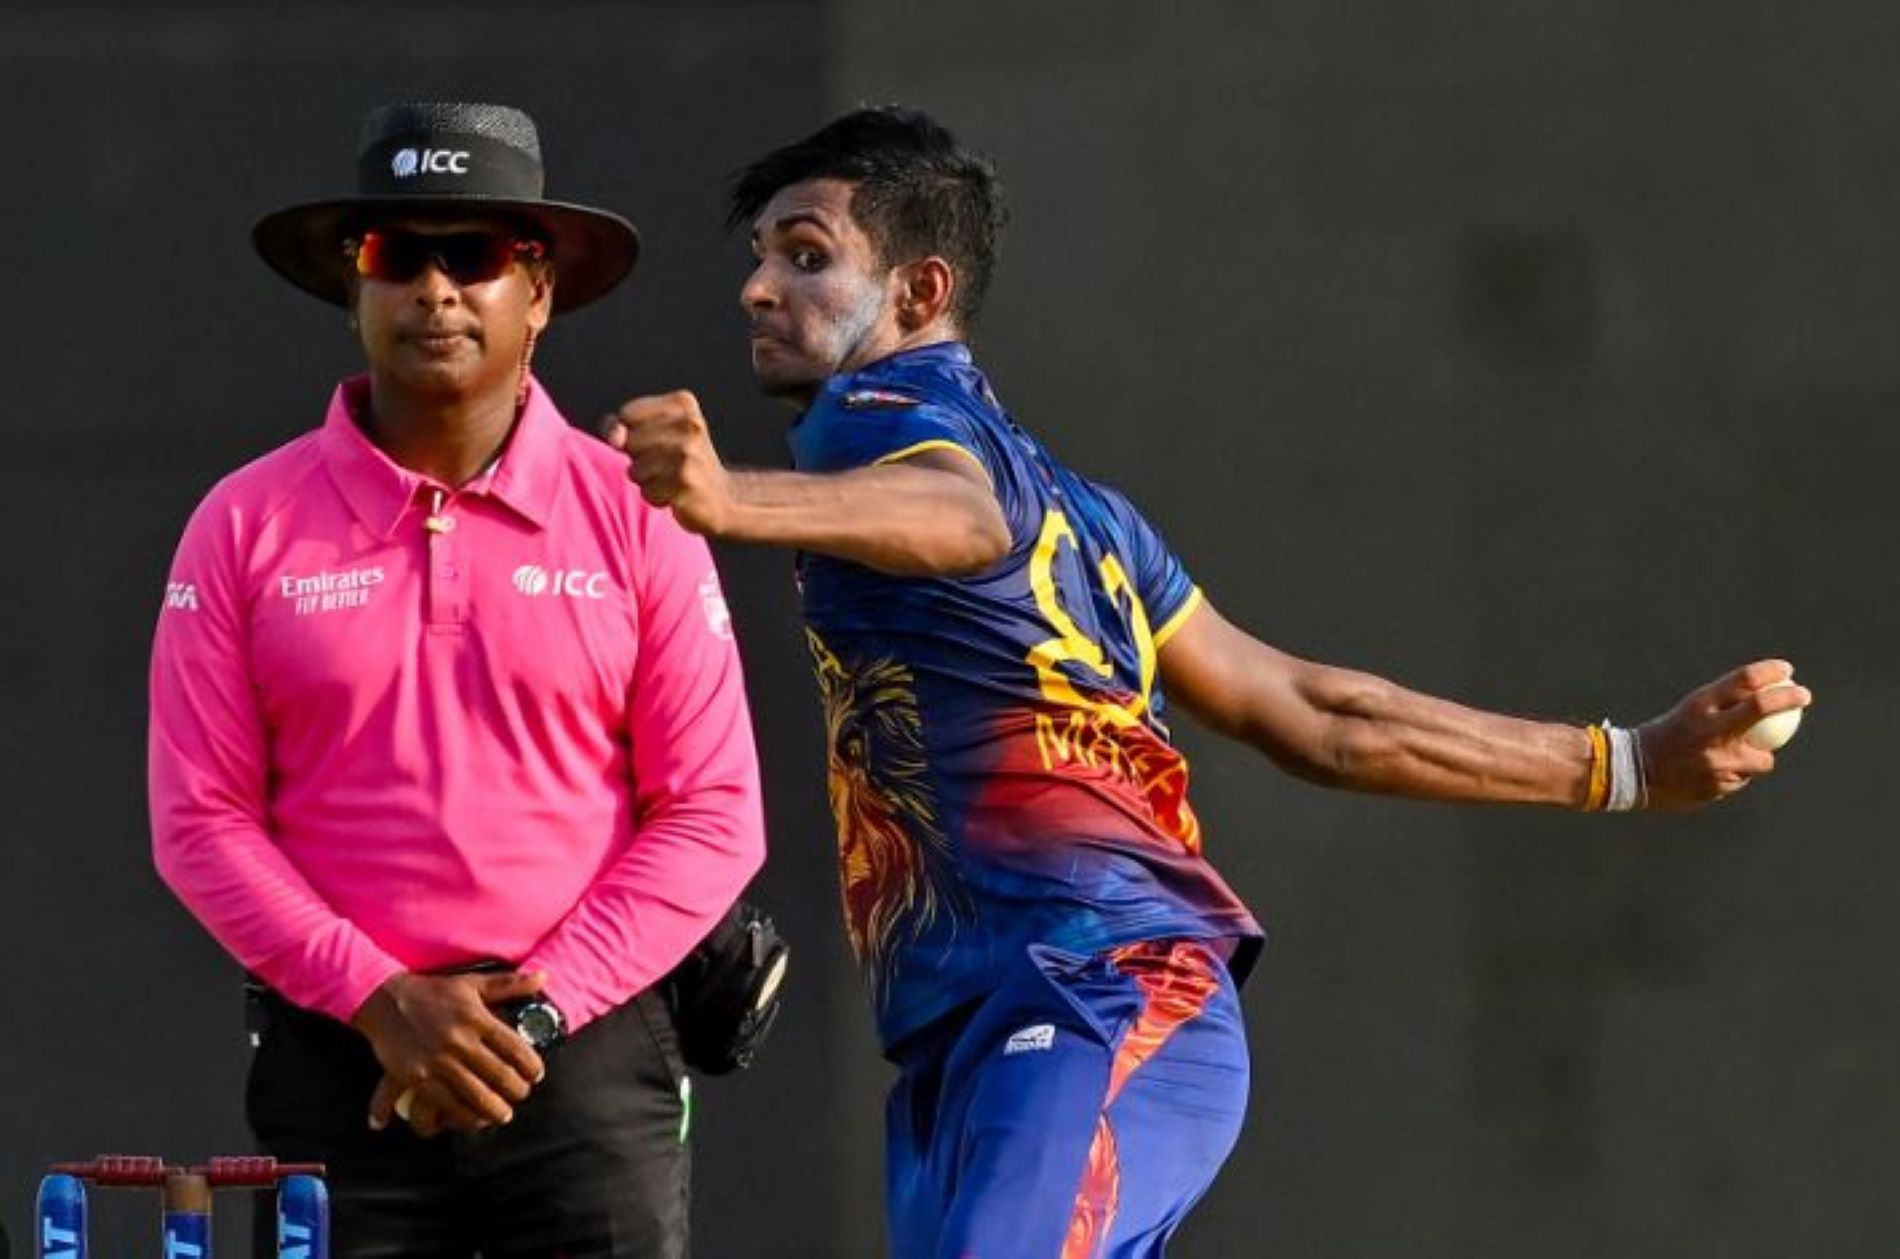 Carrying the Sri Lankan pace attack may be a bridge too far for the young Pathirana.